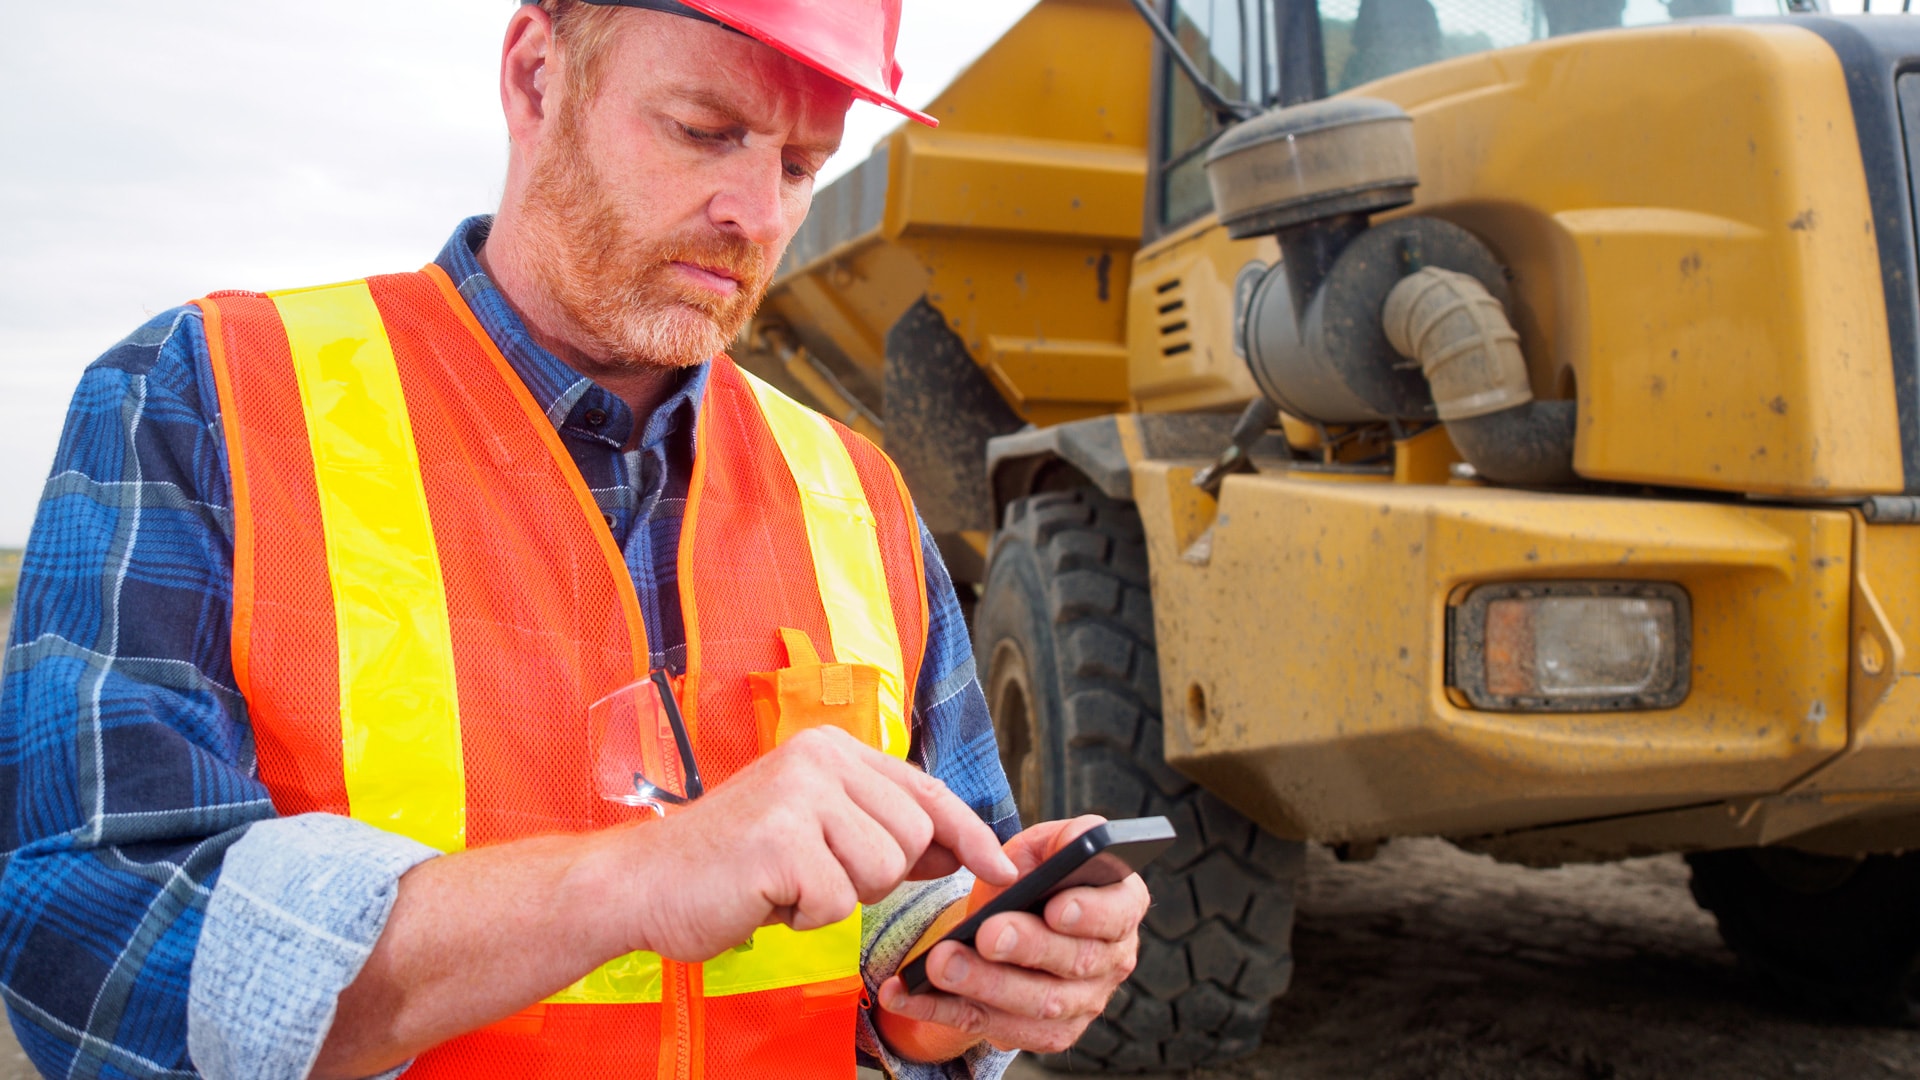 Employee using company smart phone with mobile device management in place